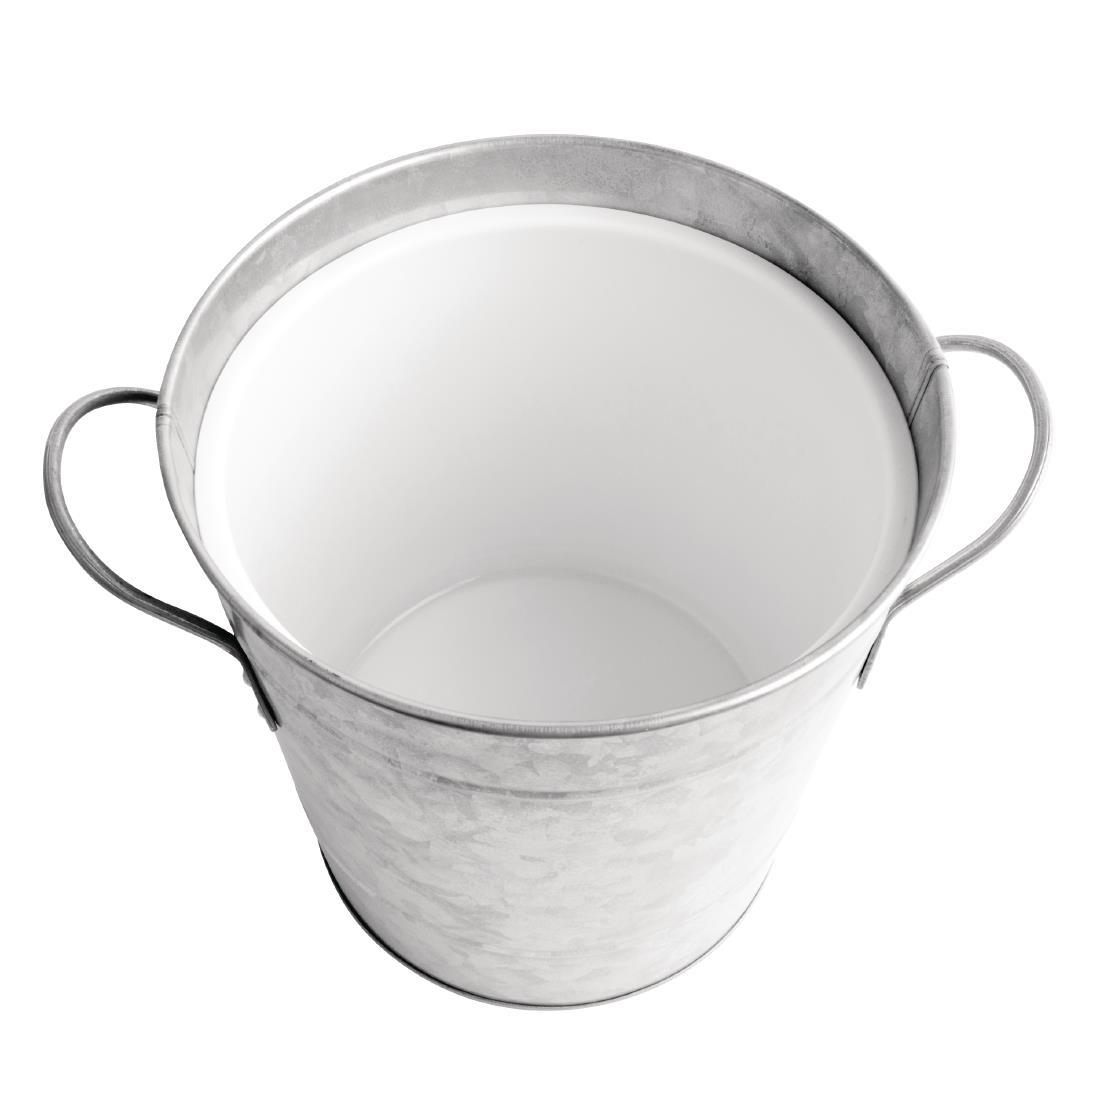 Olympia Galvanised Steel Wine And Champagne Bucket With Lid - CK824  - 3